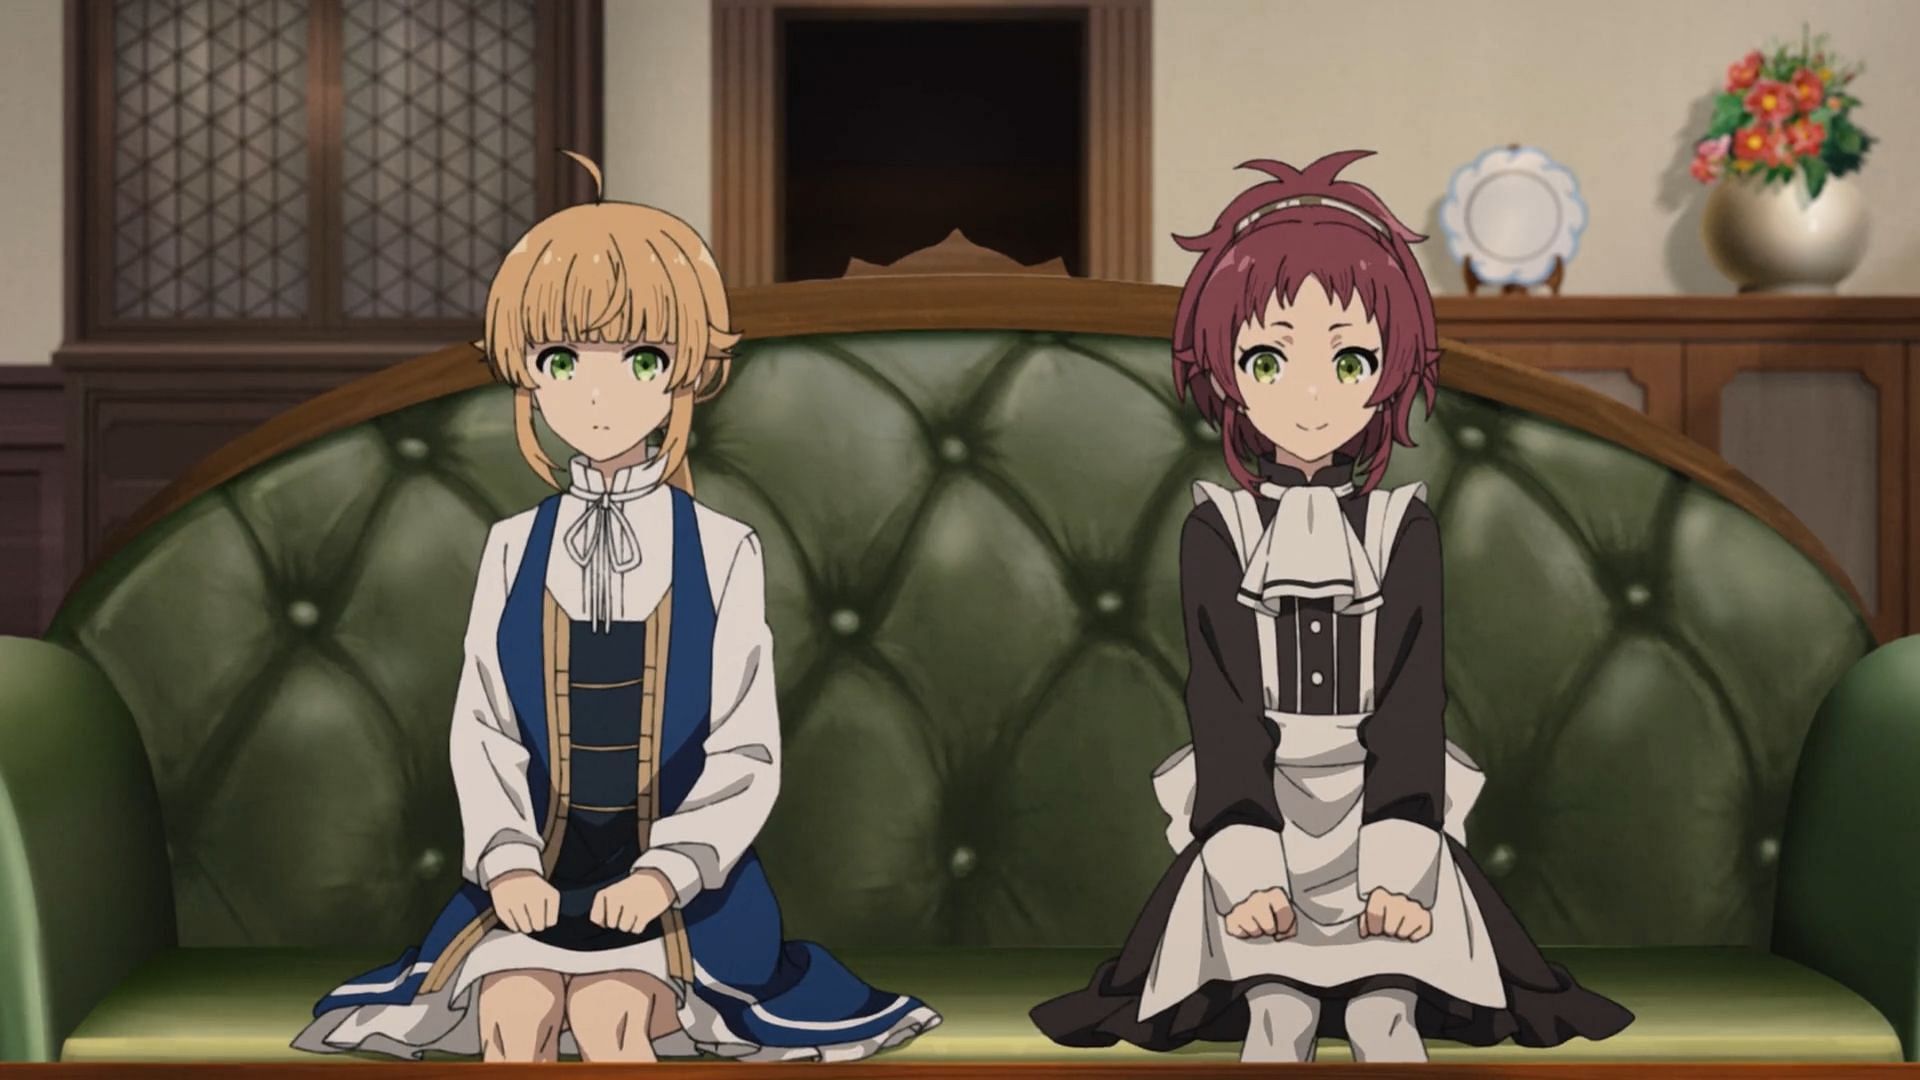 Norn and Aisha, as seen in episode 16 (Image via Bind)